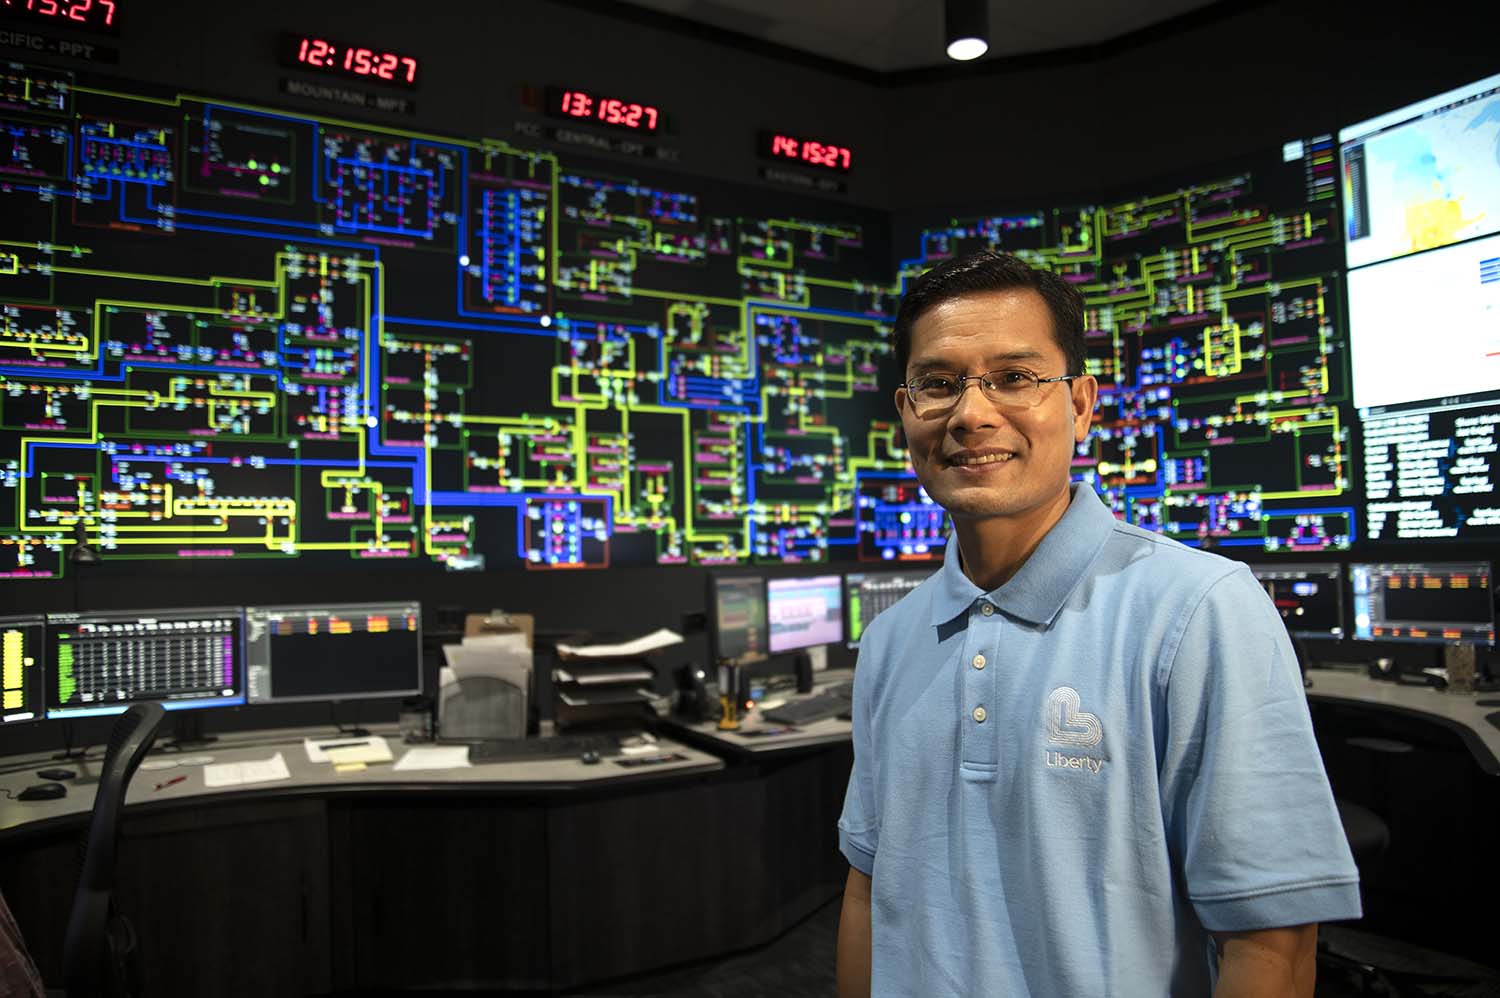 The 'big-picture' view: Liberty System Operations keeps the grid healthy - and your lights on